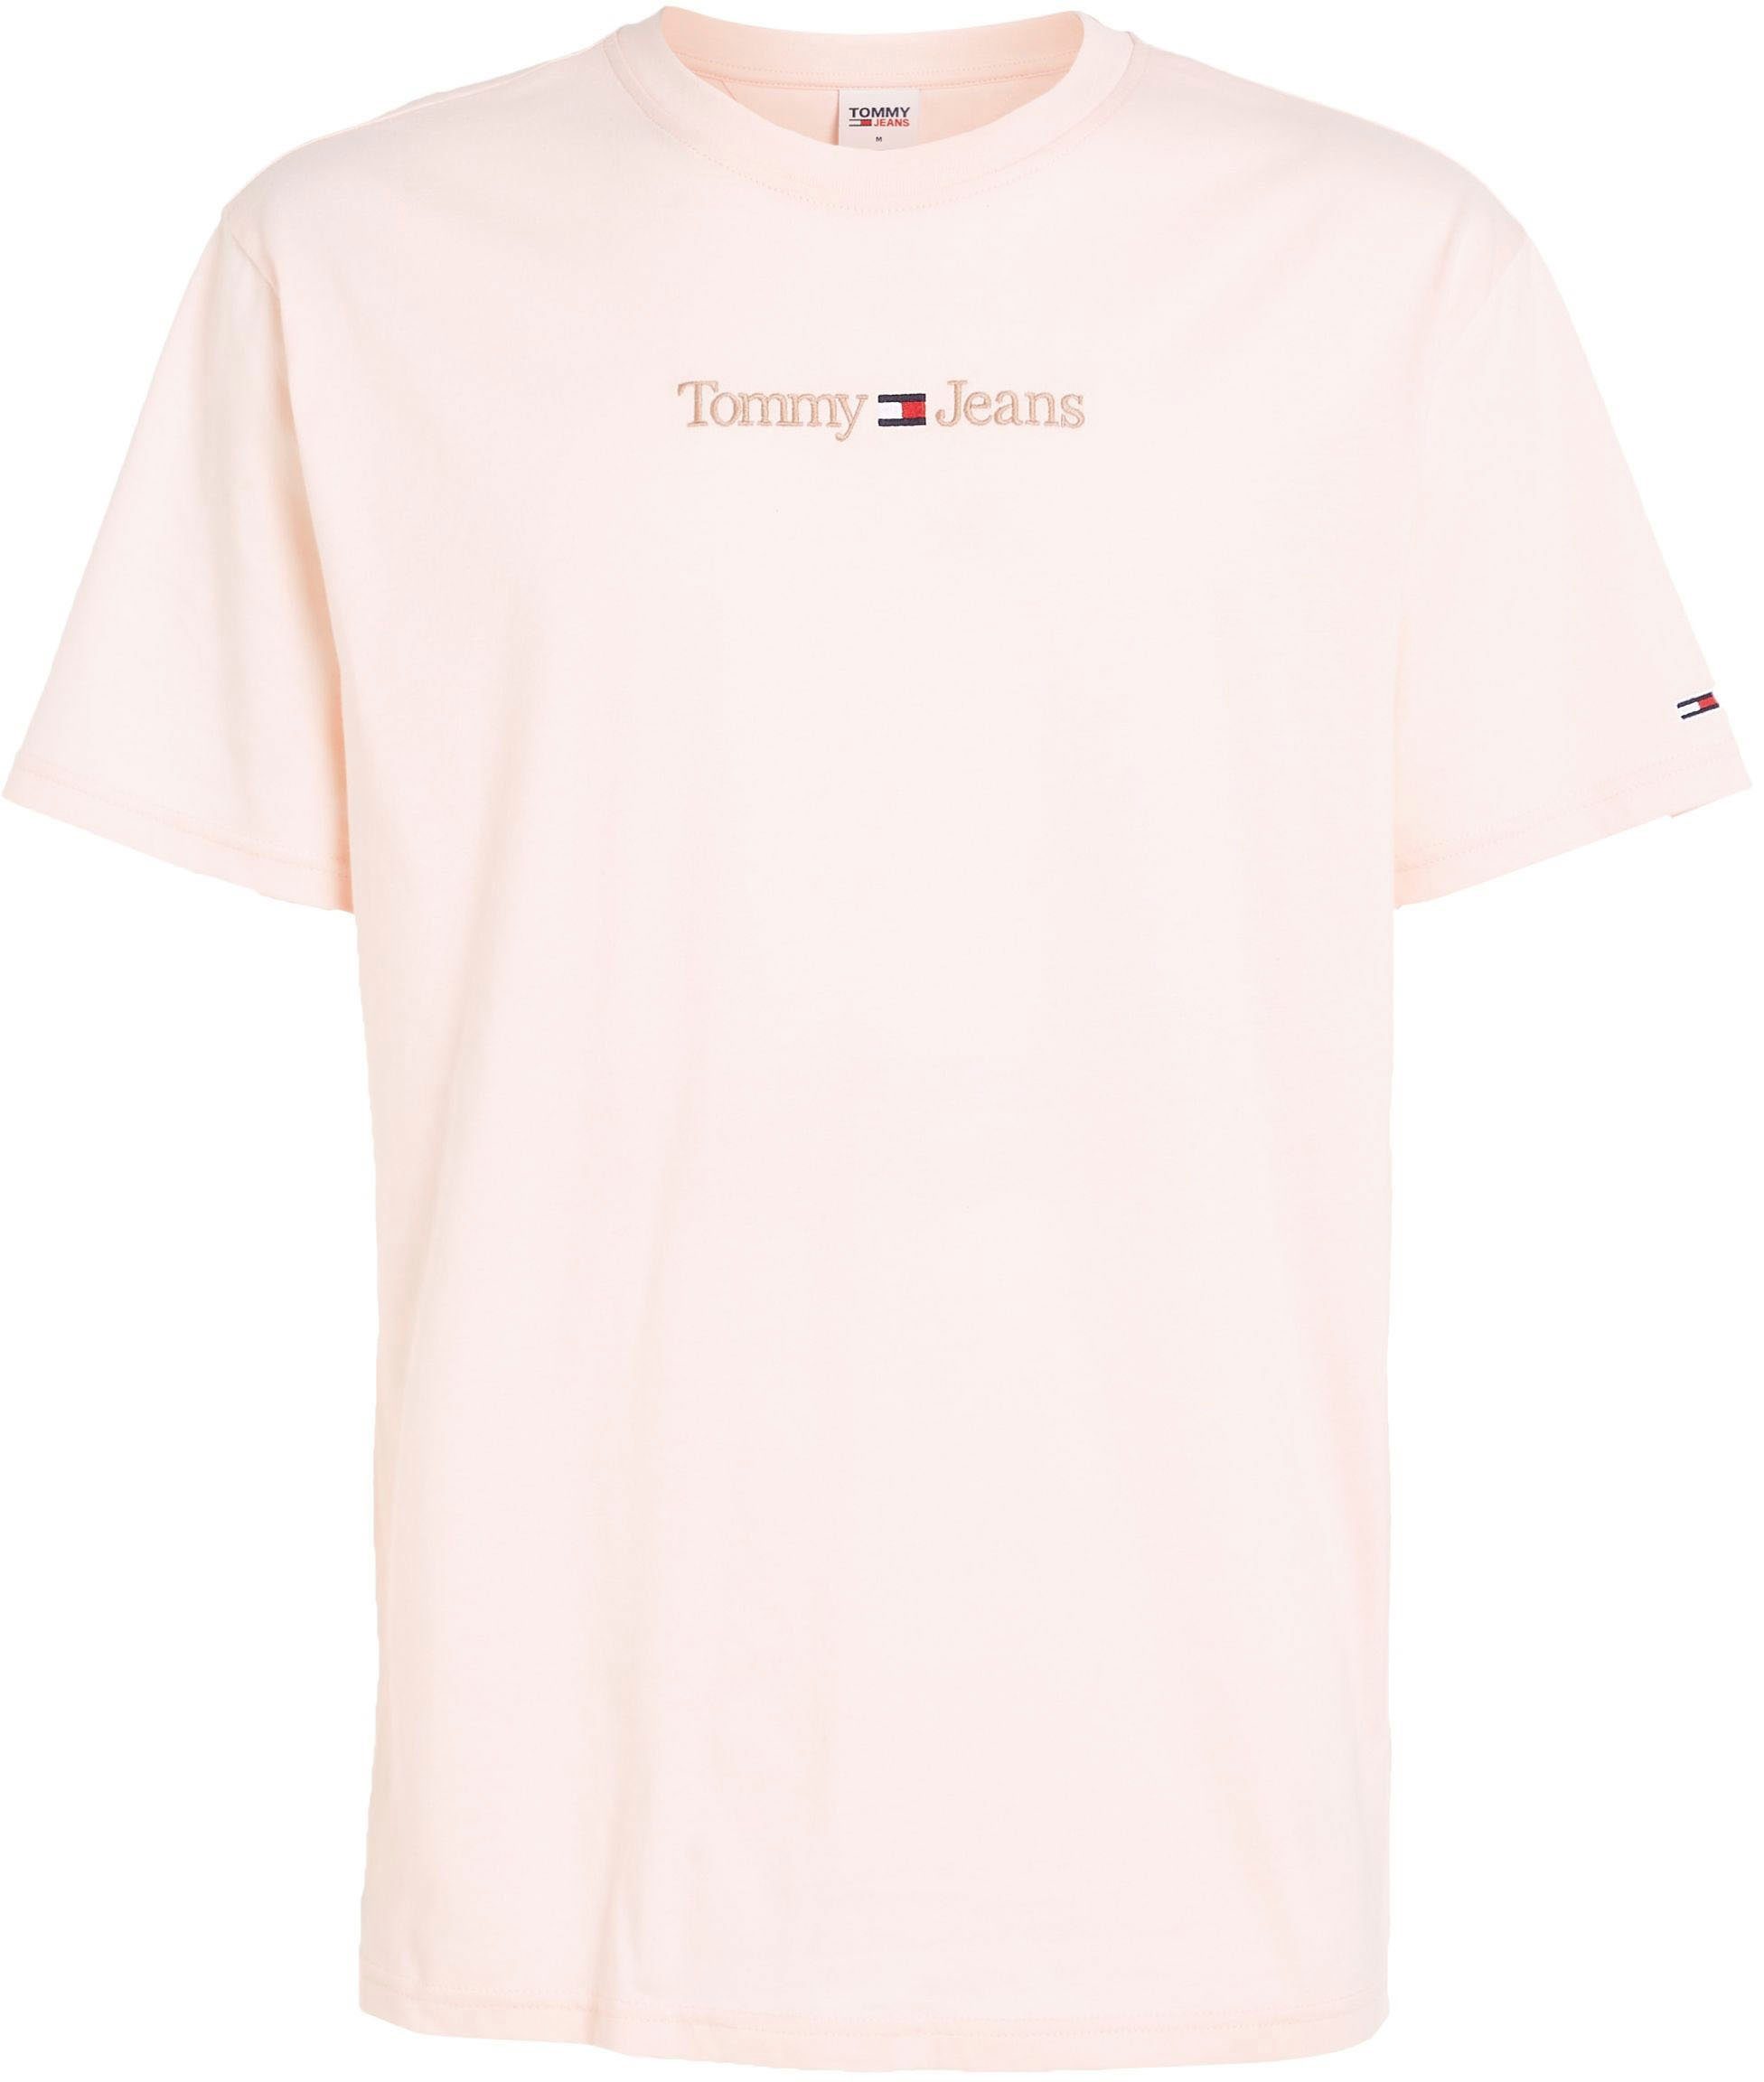 CLSC Faint TJM TEE TEXT SMALL Pink Tommy Jeans T-Shirt